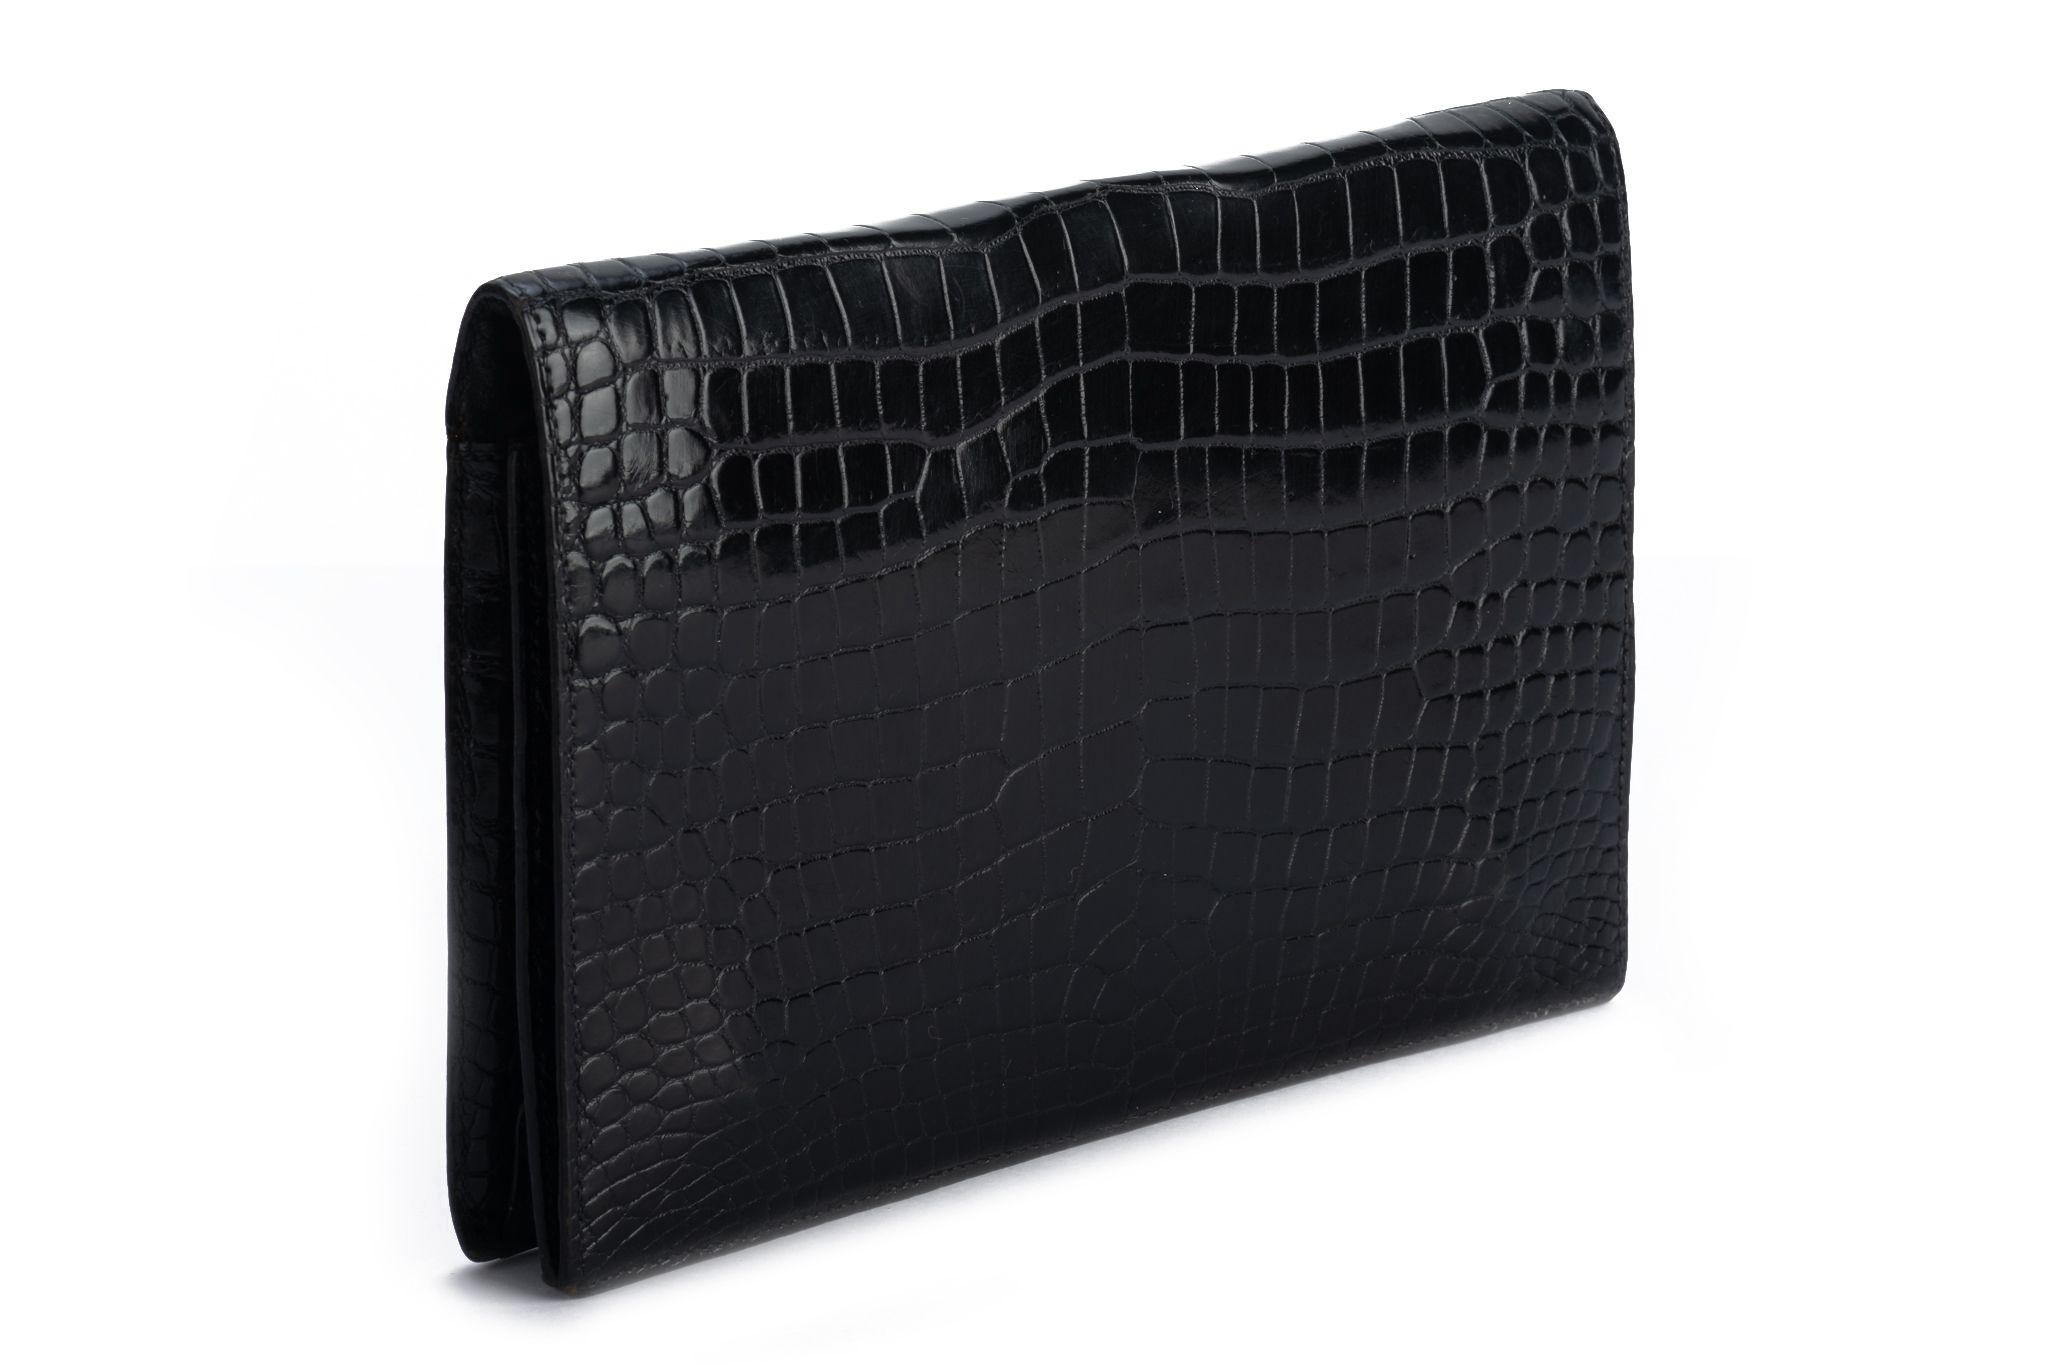 Hermes vintage black crocodile clutch with gold tone hardware. Pre stamp production, comes with original dust cover.